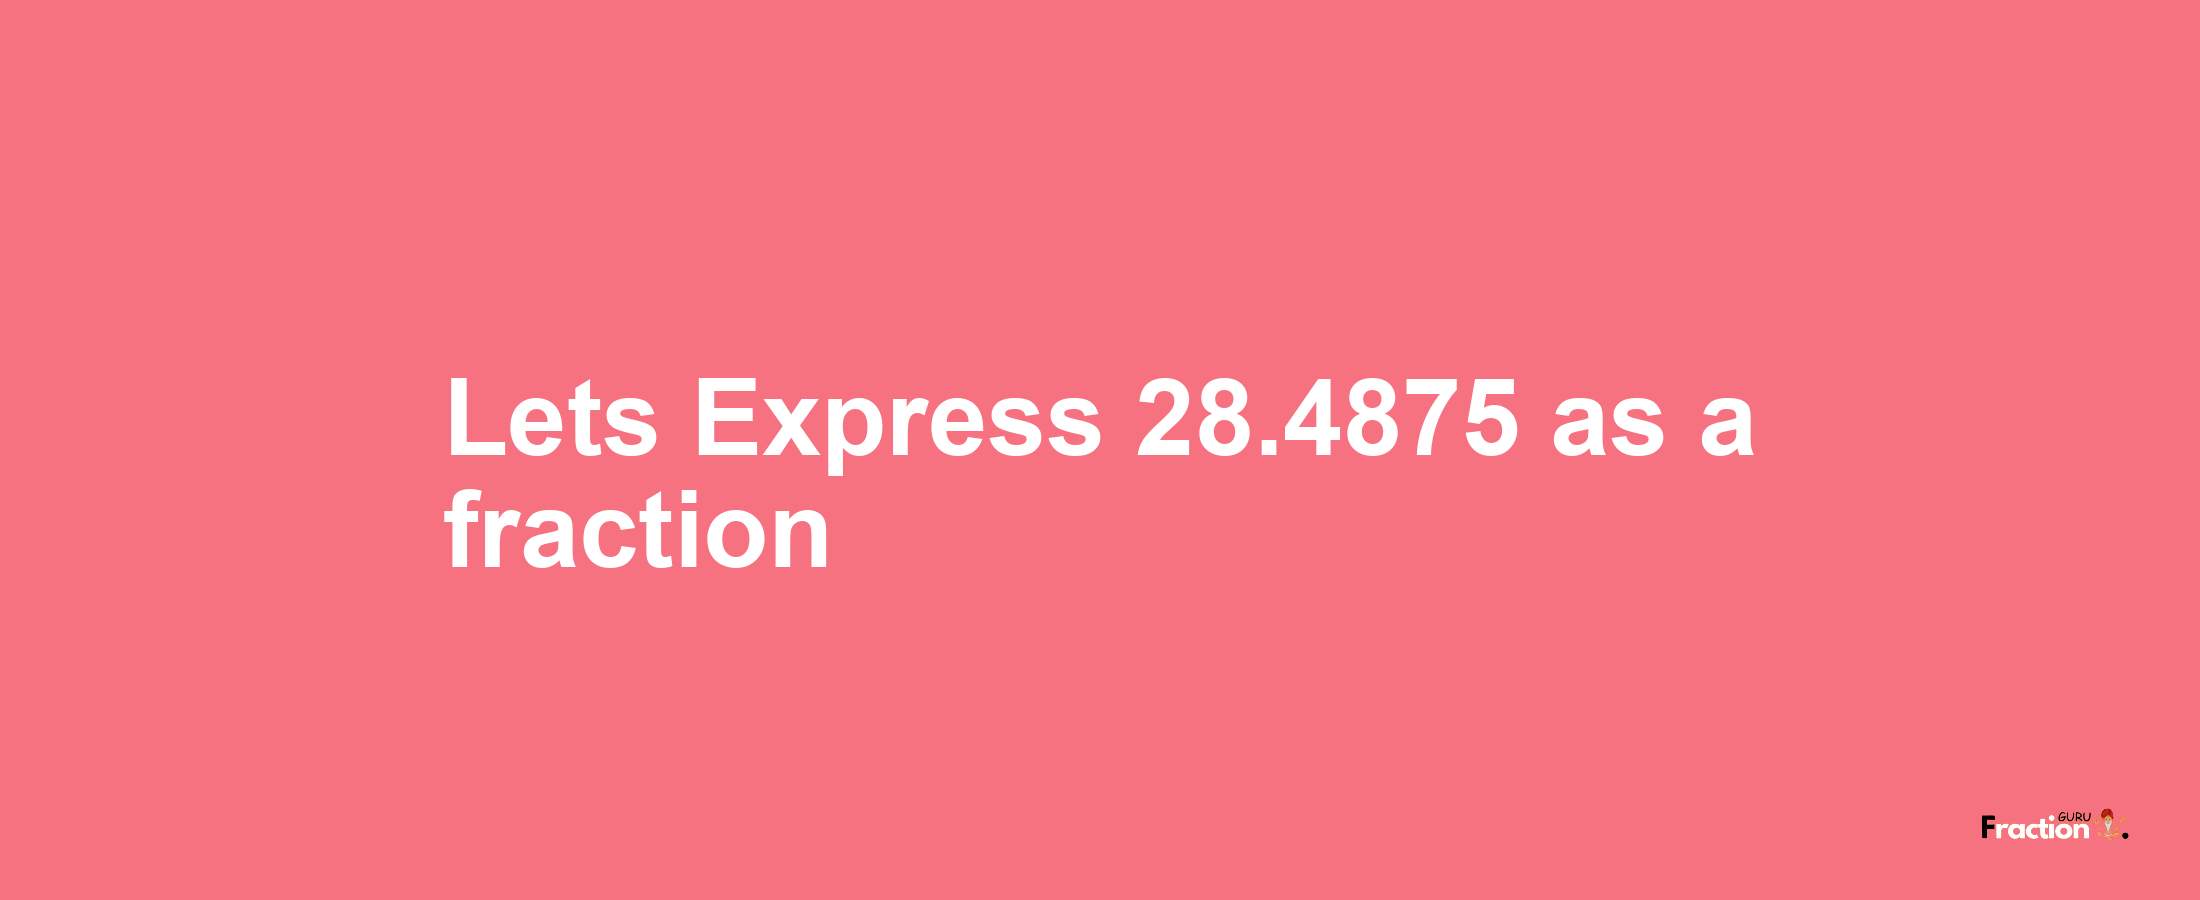 Lets Express 28.4875 as afraction